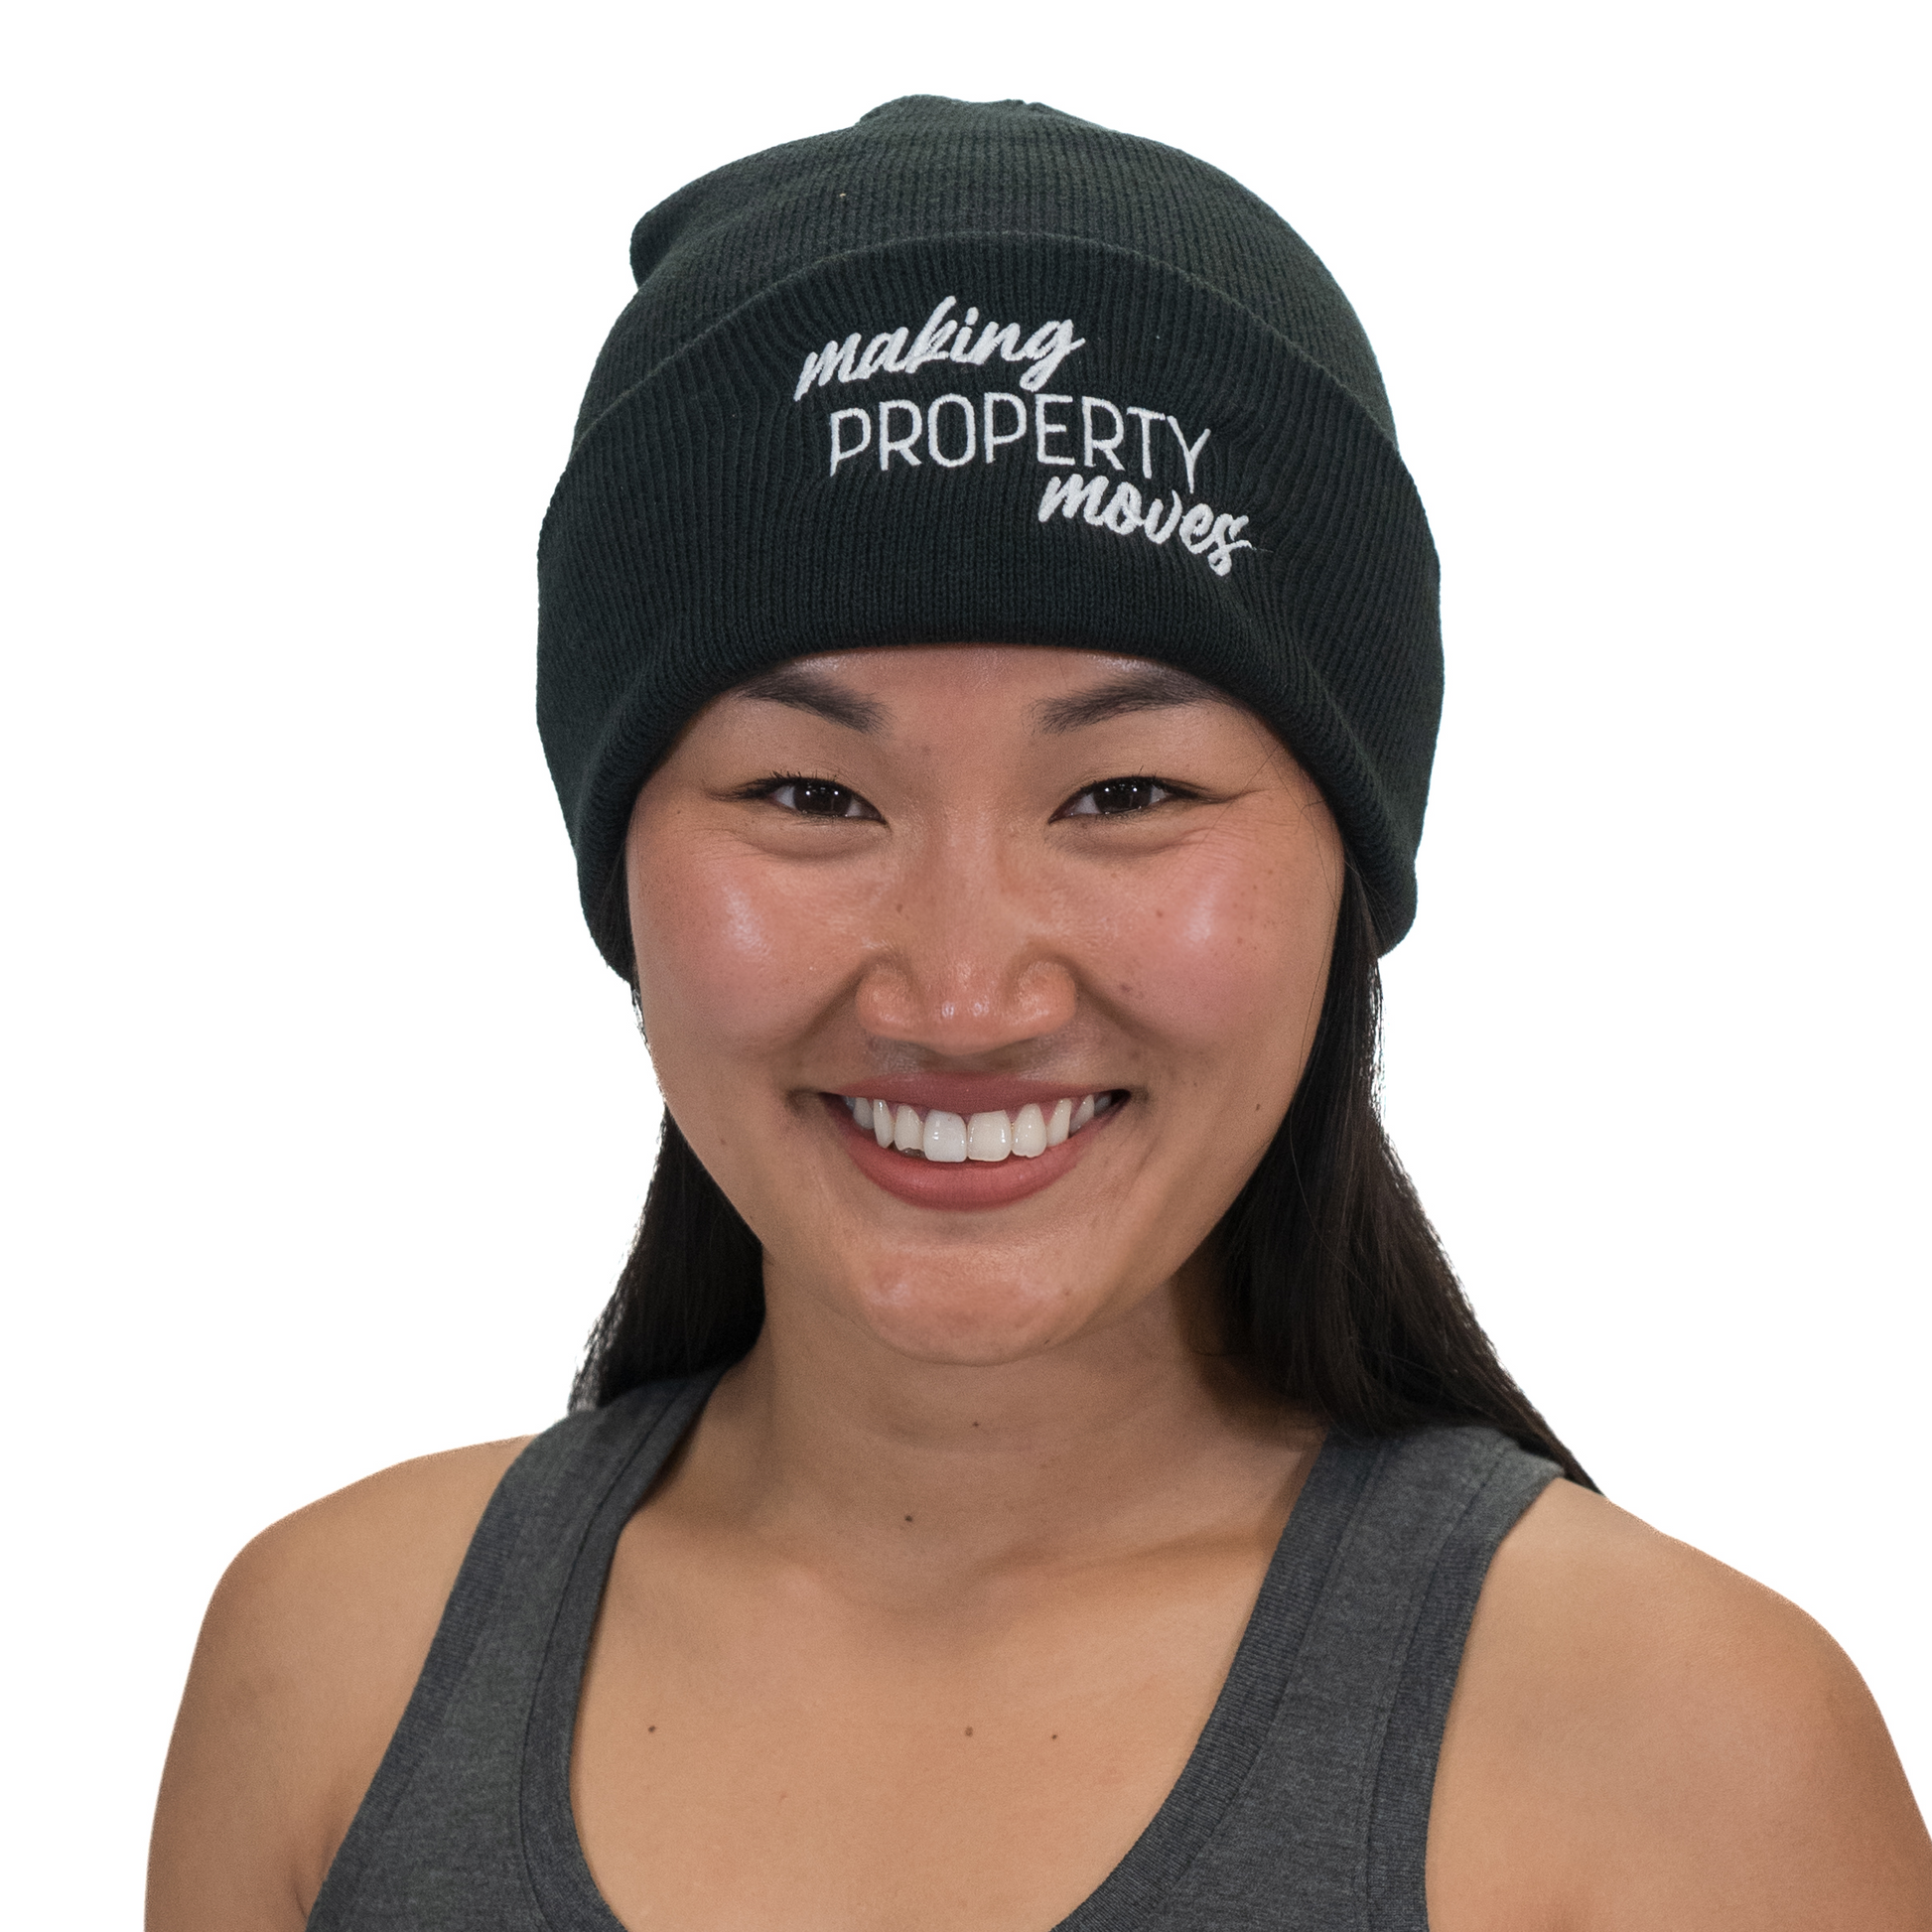 Making Property Moves | Beanie Hats   